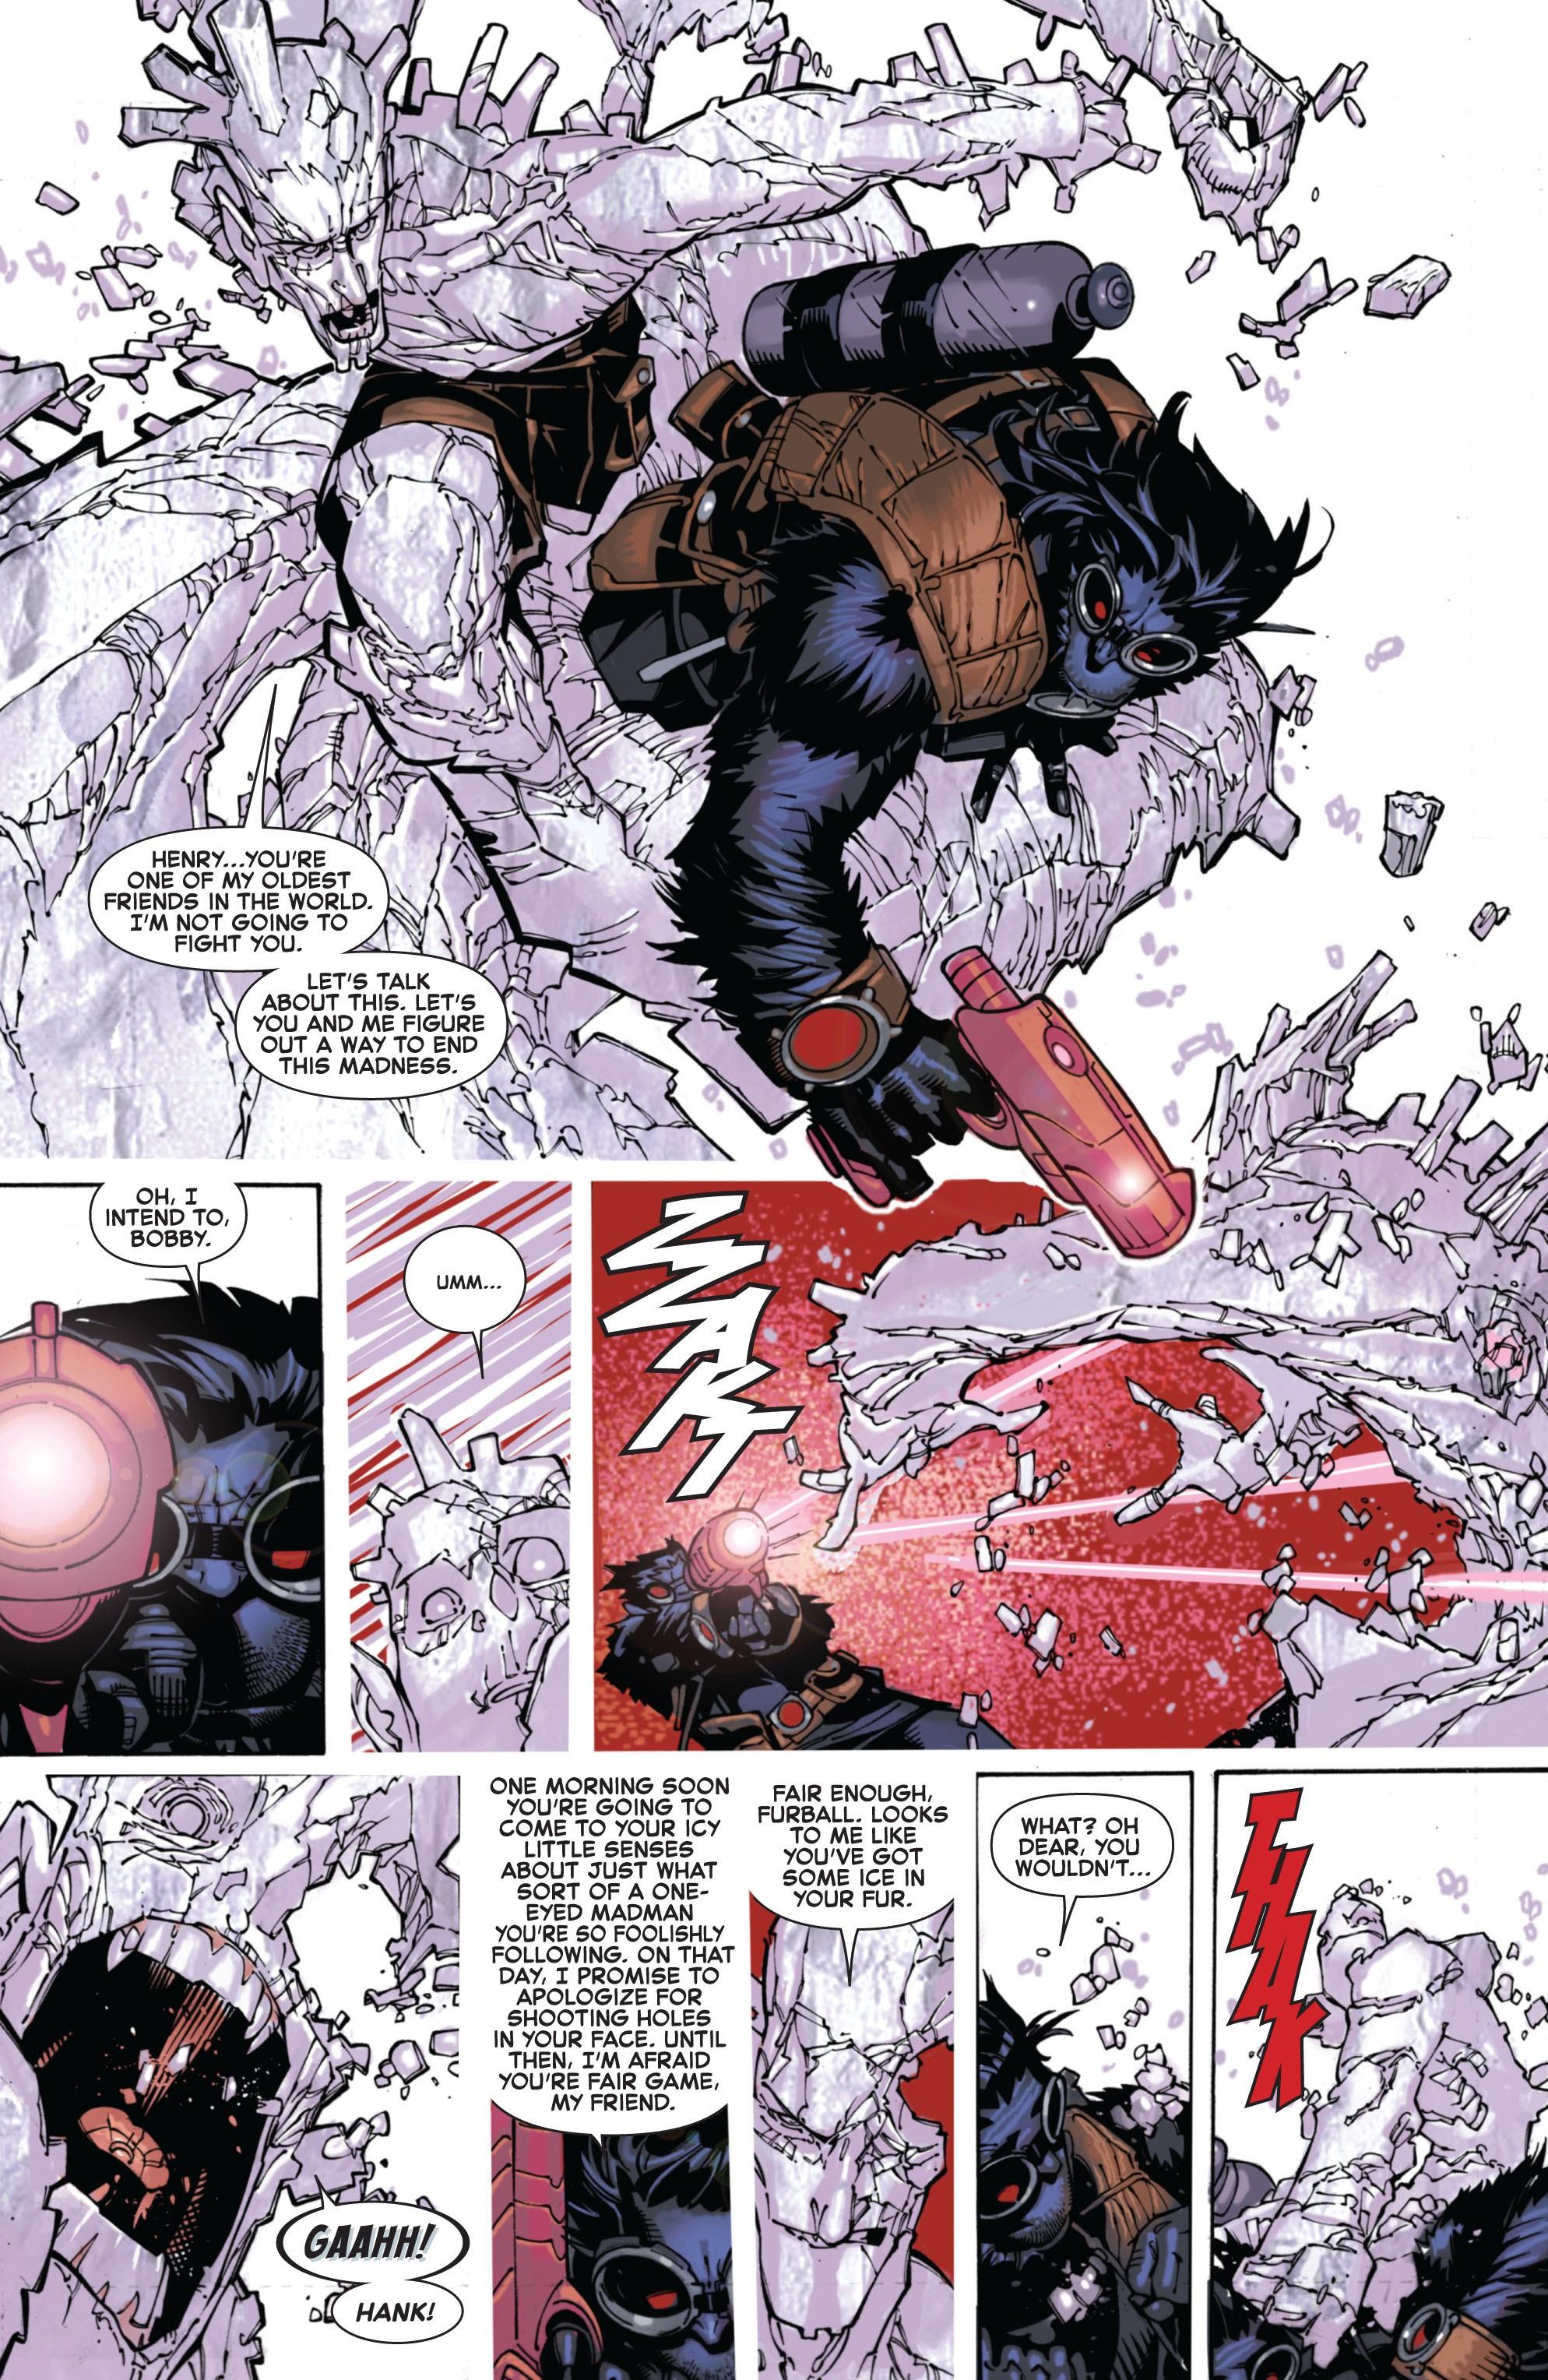 Wolverine and the X-Men v 3 review